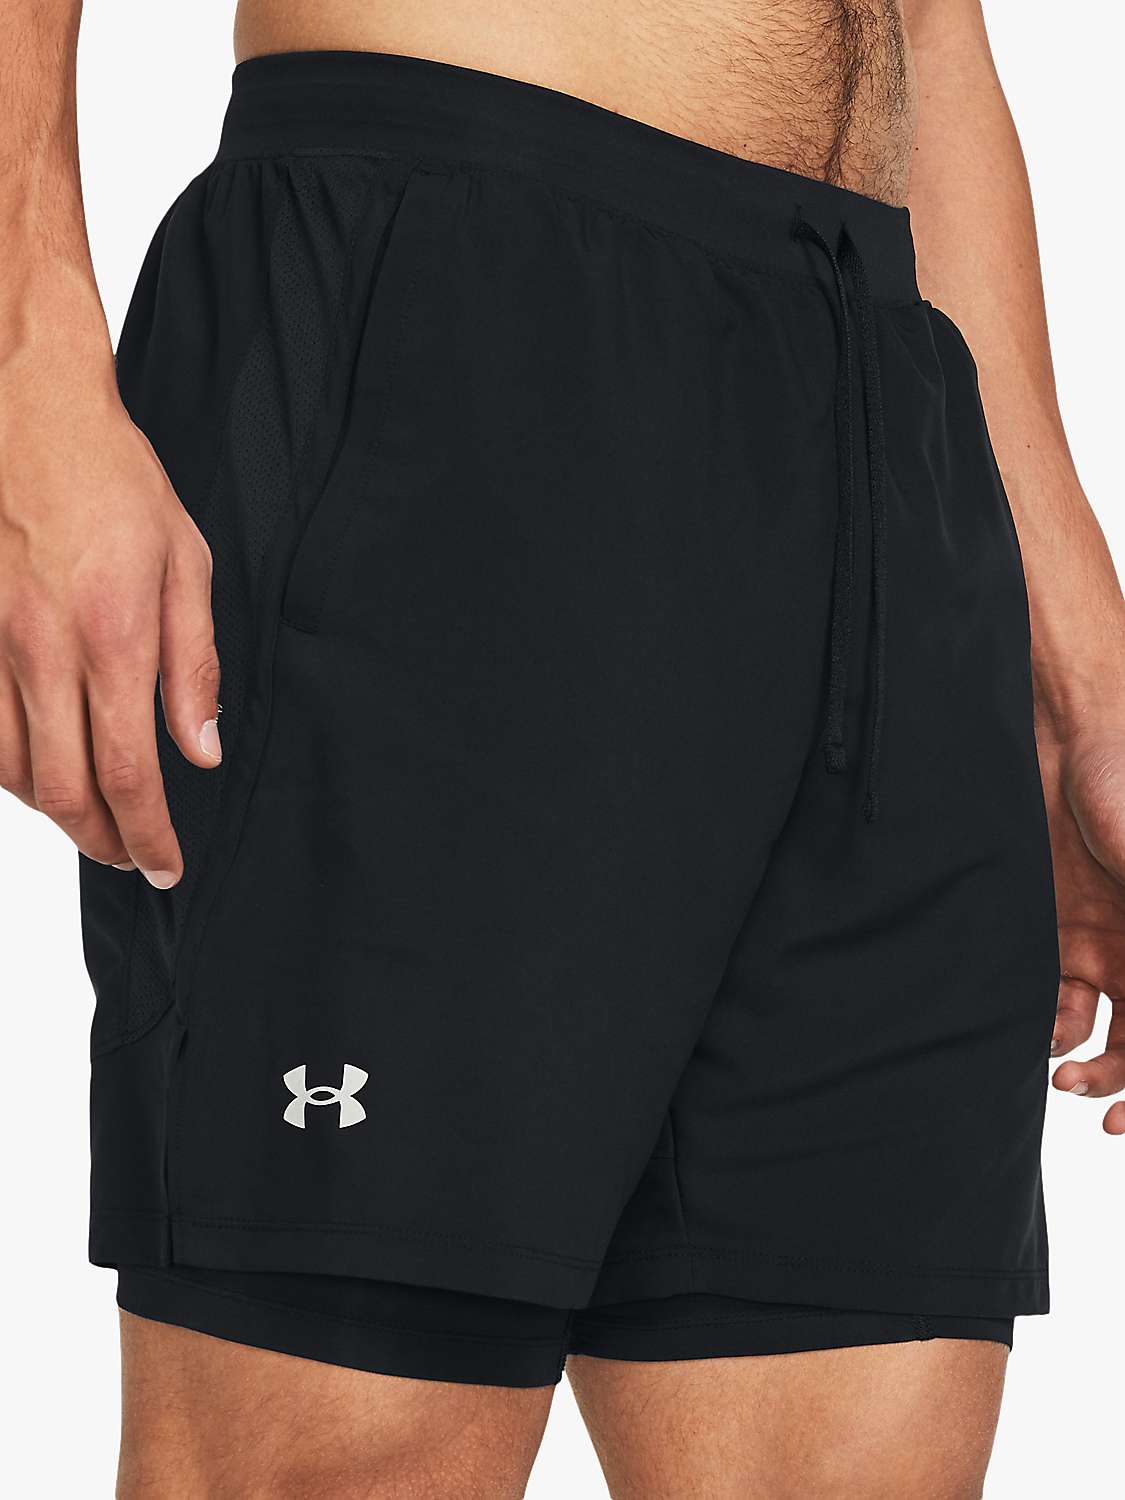 Buy Under Armour Launch 2-in-1 Running Shorts, Black/Reflective Online at johnlewis.com